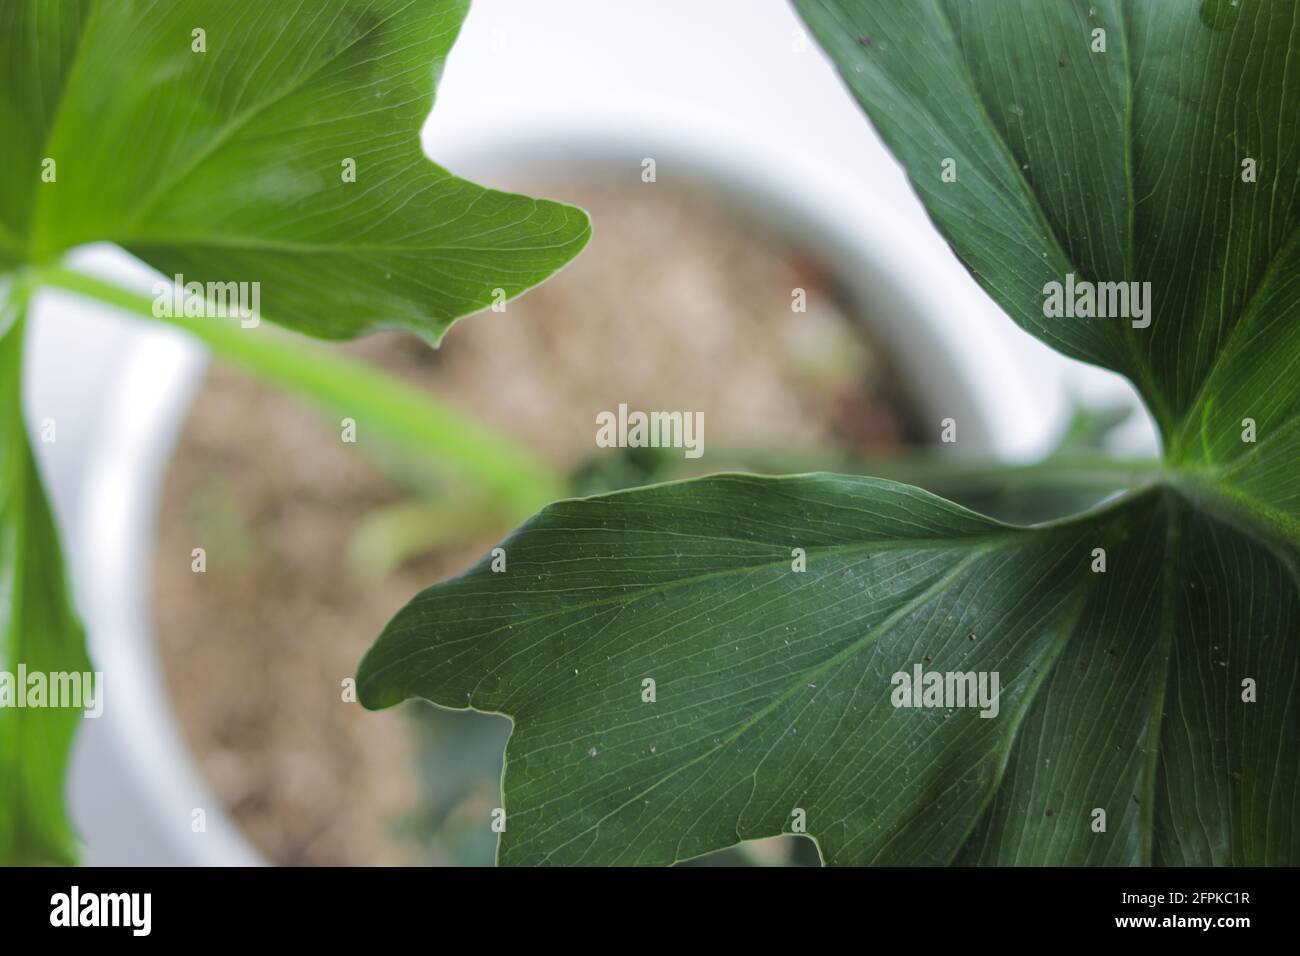 Tropical plant leaves background. Close-up view of philoderon leaves. houseplant for home decor. Stock Photo